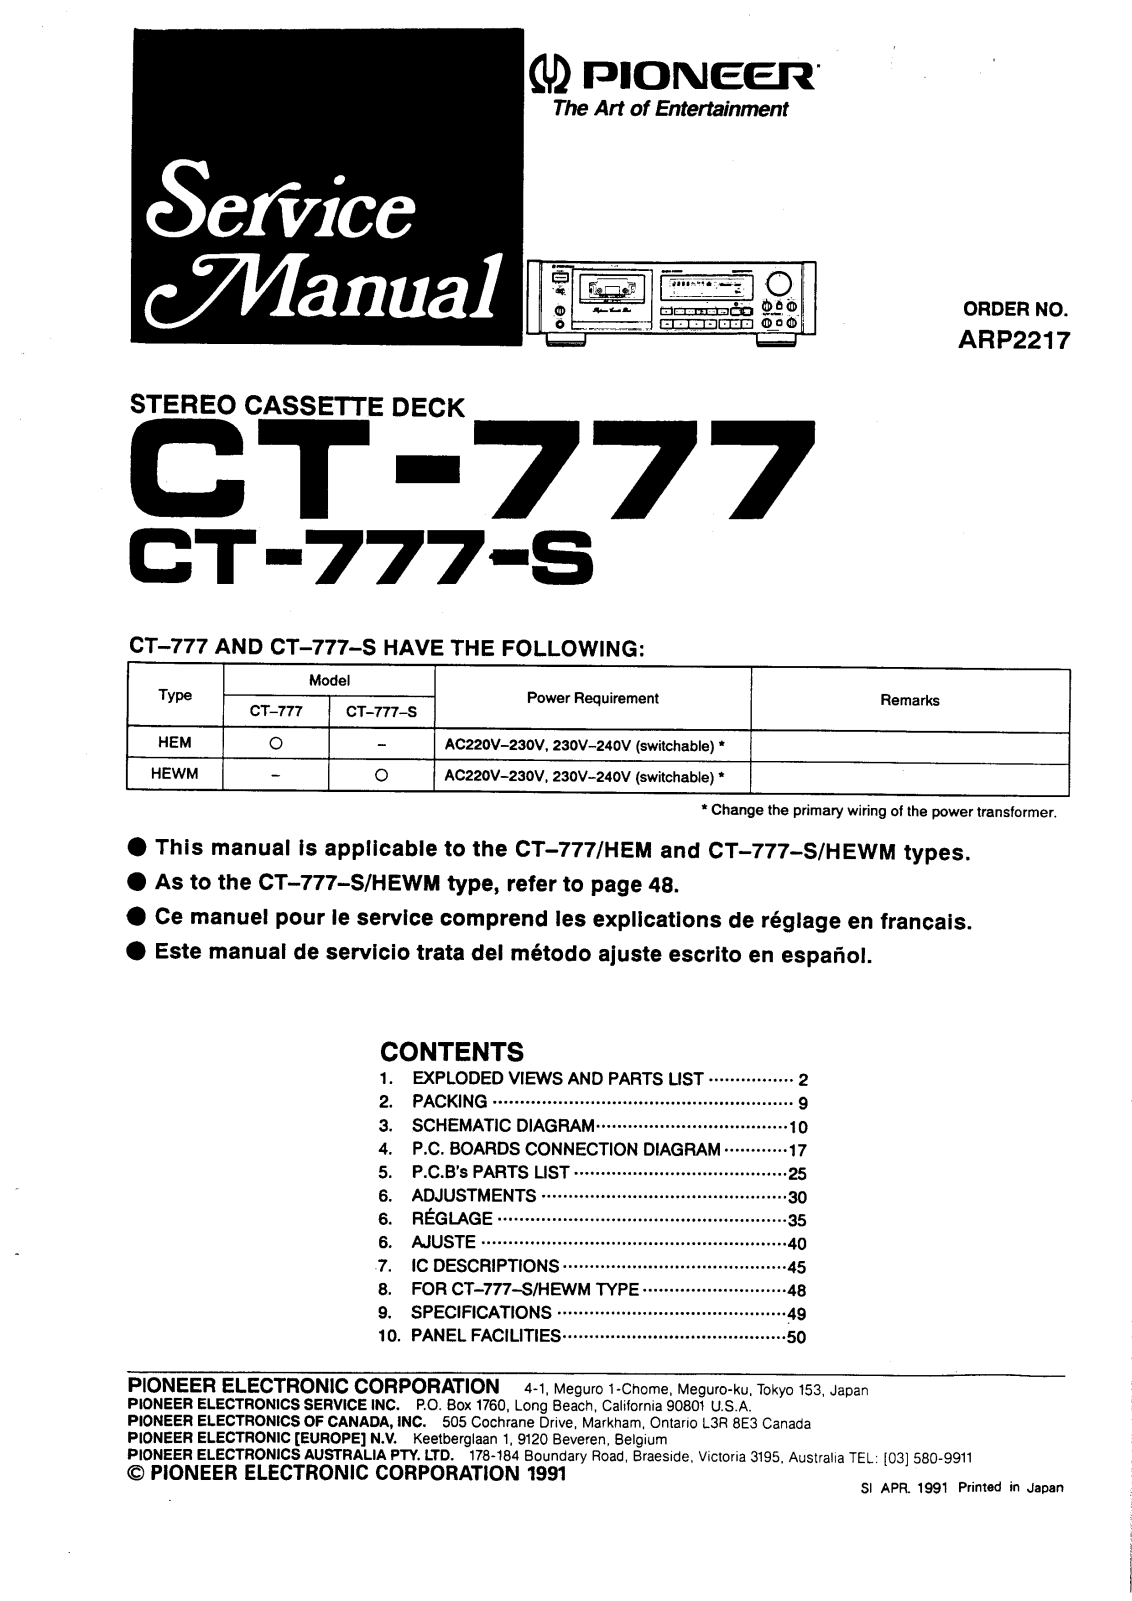 Pioneer CT-777, CT-777-S Service manual